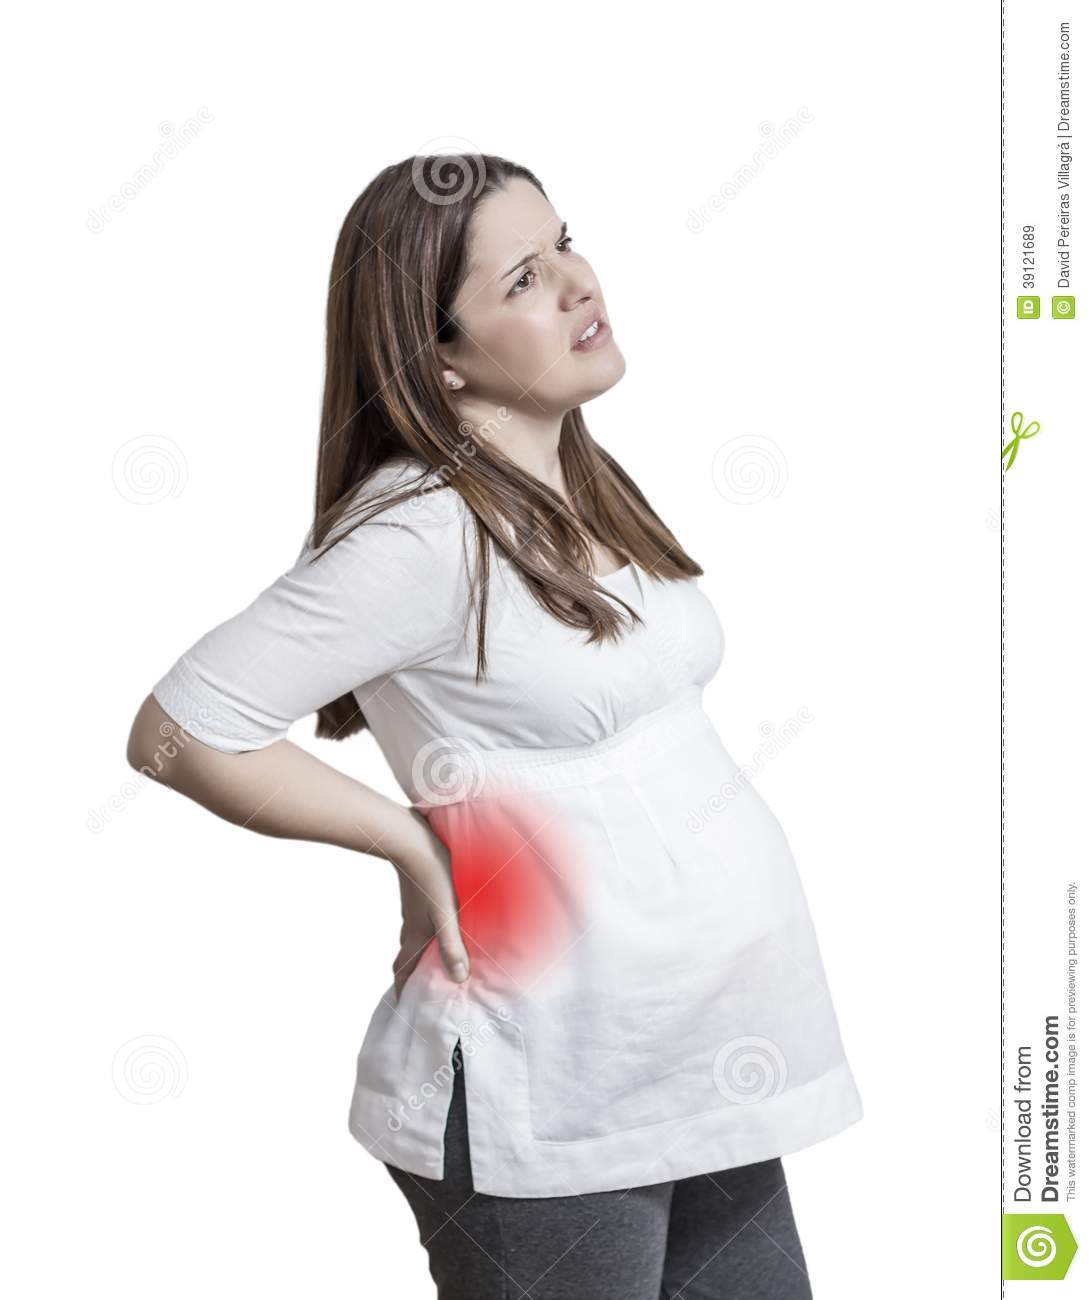 Pregnant Woman with Strong Pain Massaging Her Back Stock Image